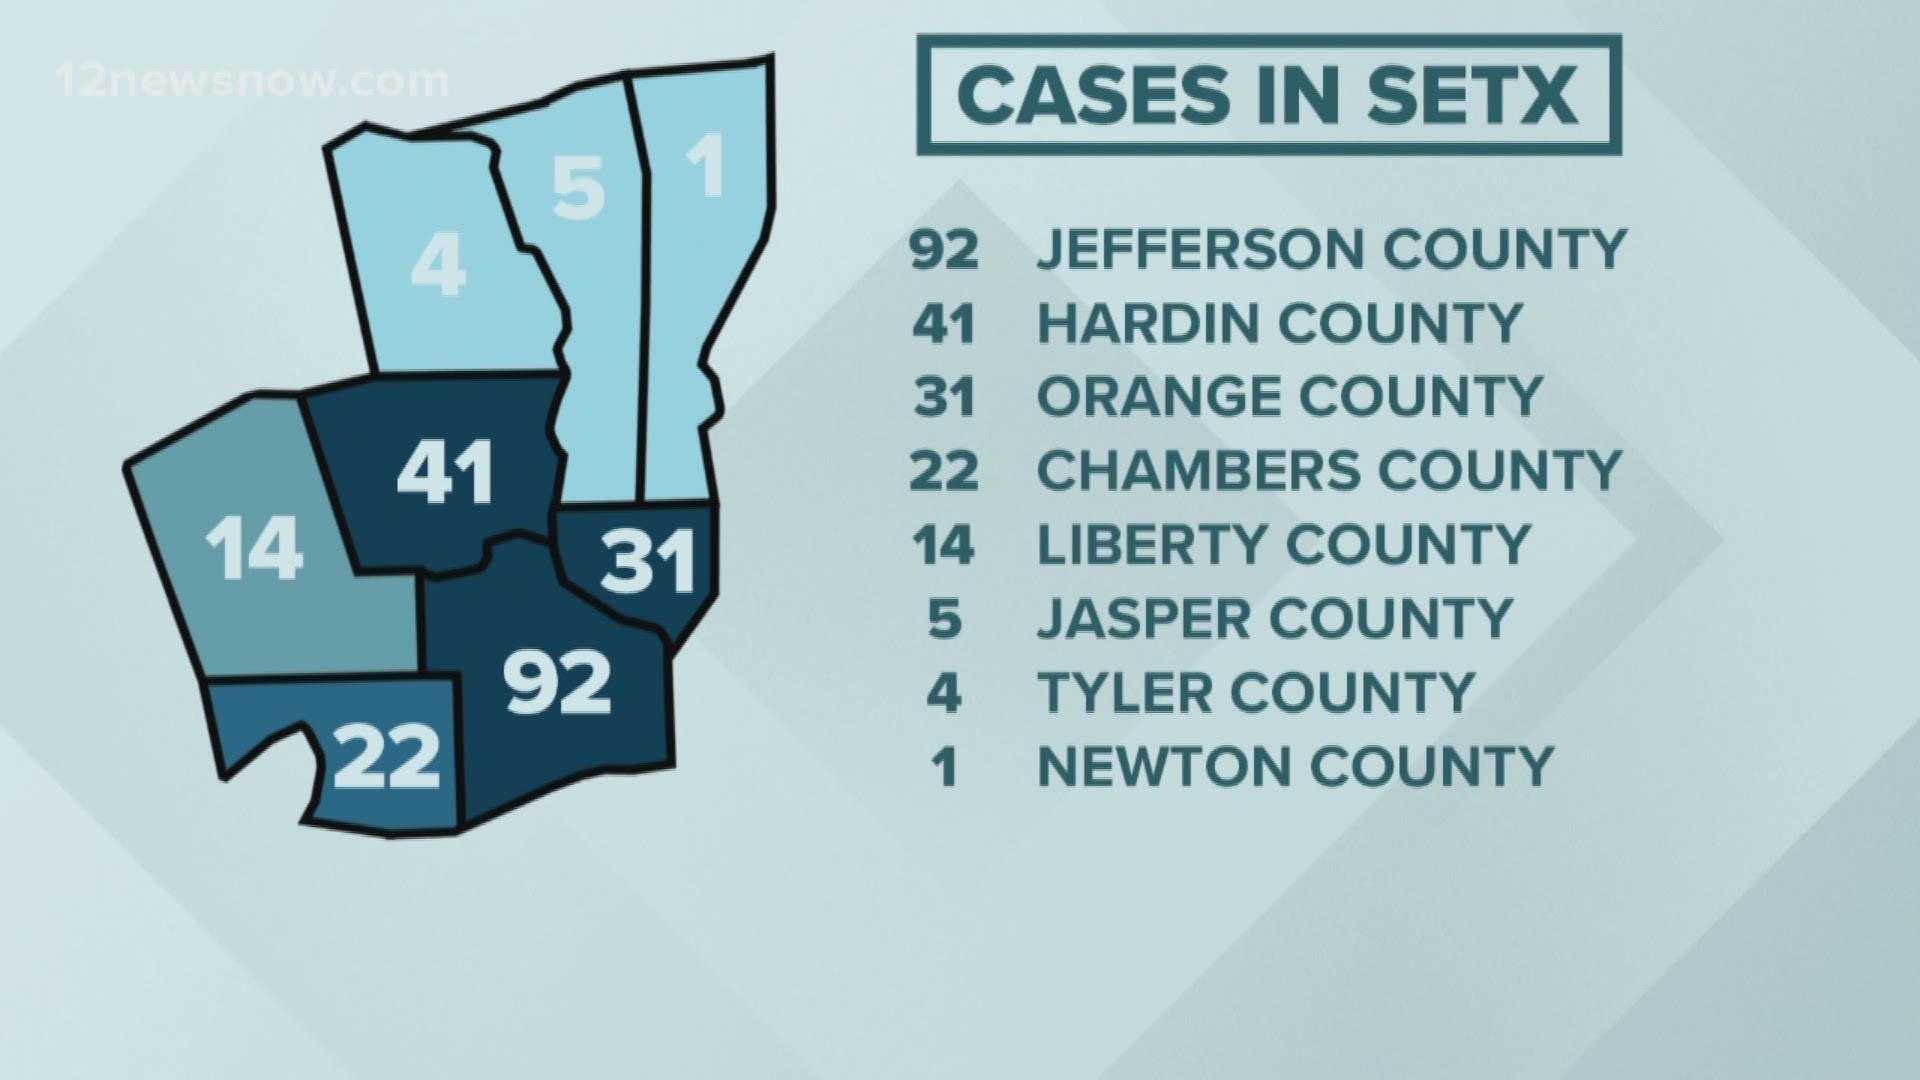 Eight people have died in the eight-county region 12News is tracking